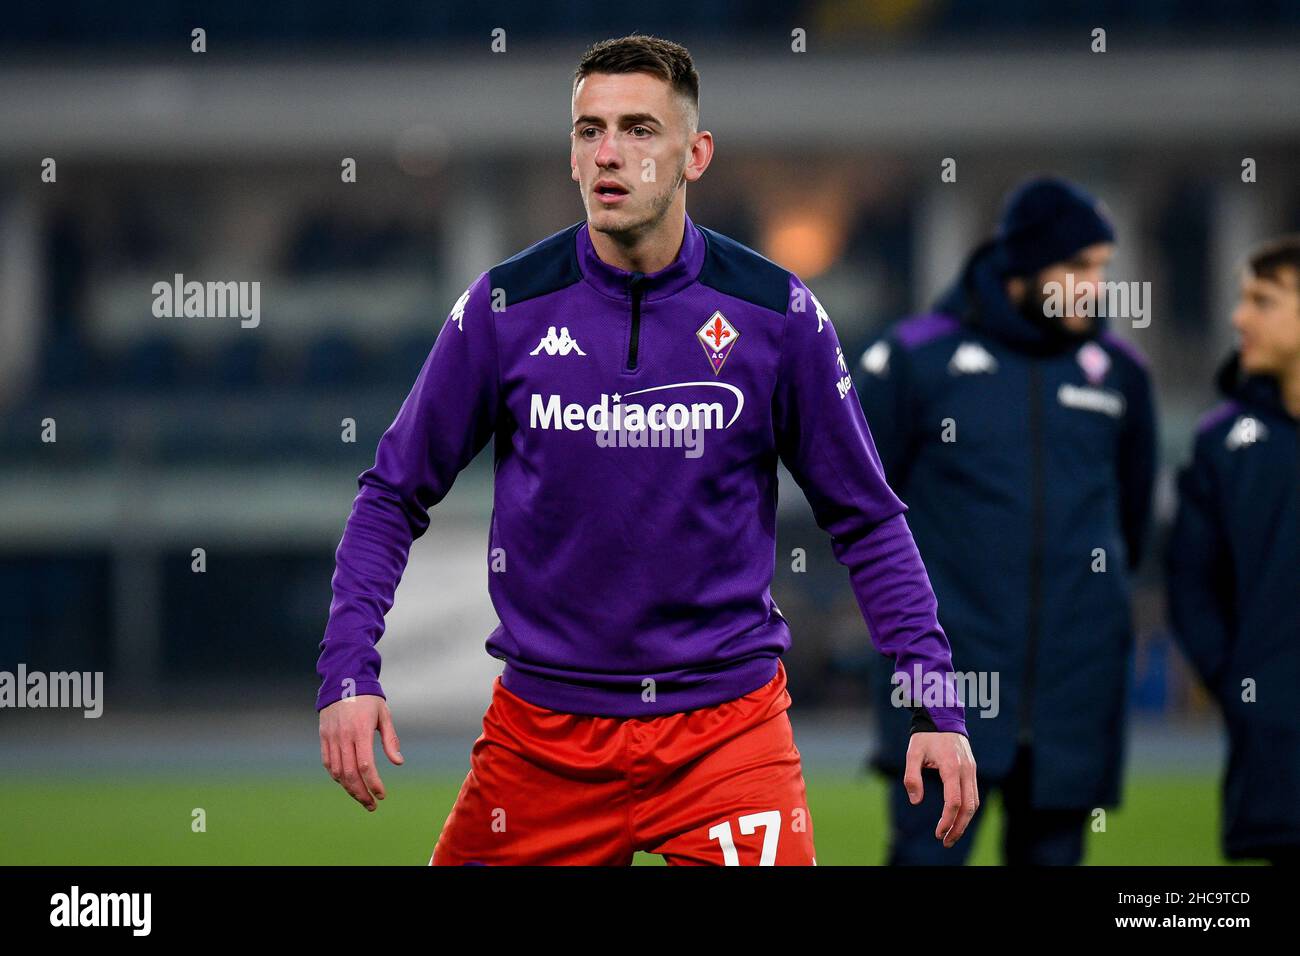 Aleksa Terzic Of Acf Fiorentina High Resolution Stock Photography and  Images - Alamy